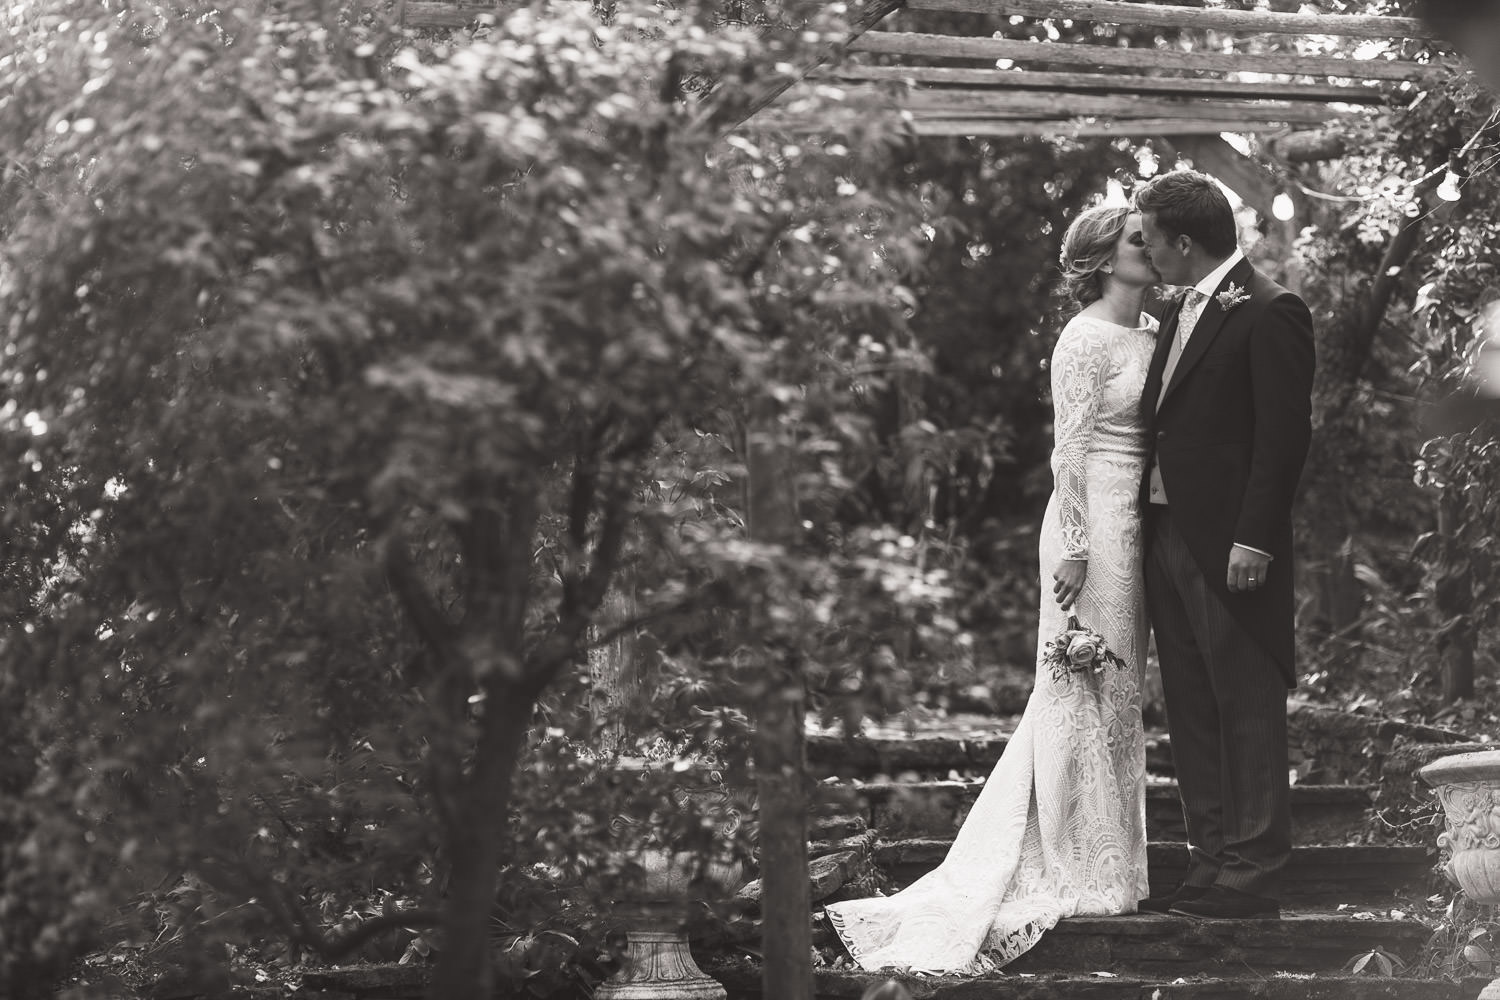 On the steps under a pergola in a family garden a bride and groom kiss. They are surrounded by trees and plants. The bride is wearing a long lace wedding dress with long sleeves. The groom is in a morning suit with a waistcoat.